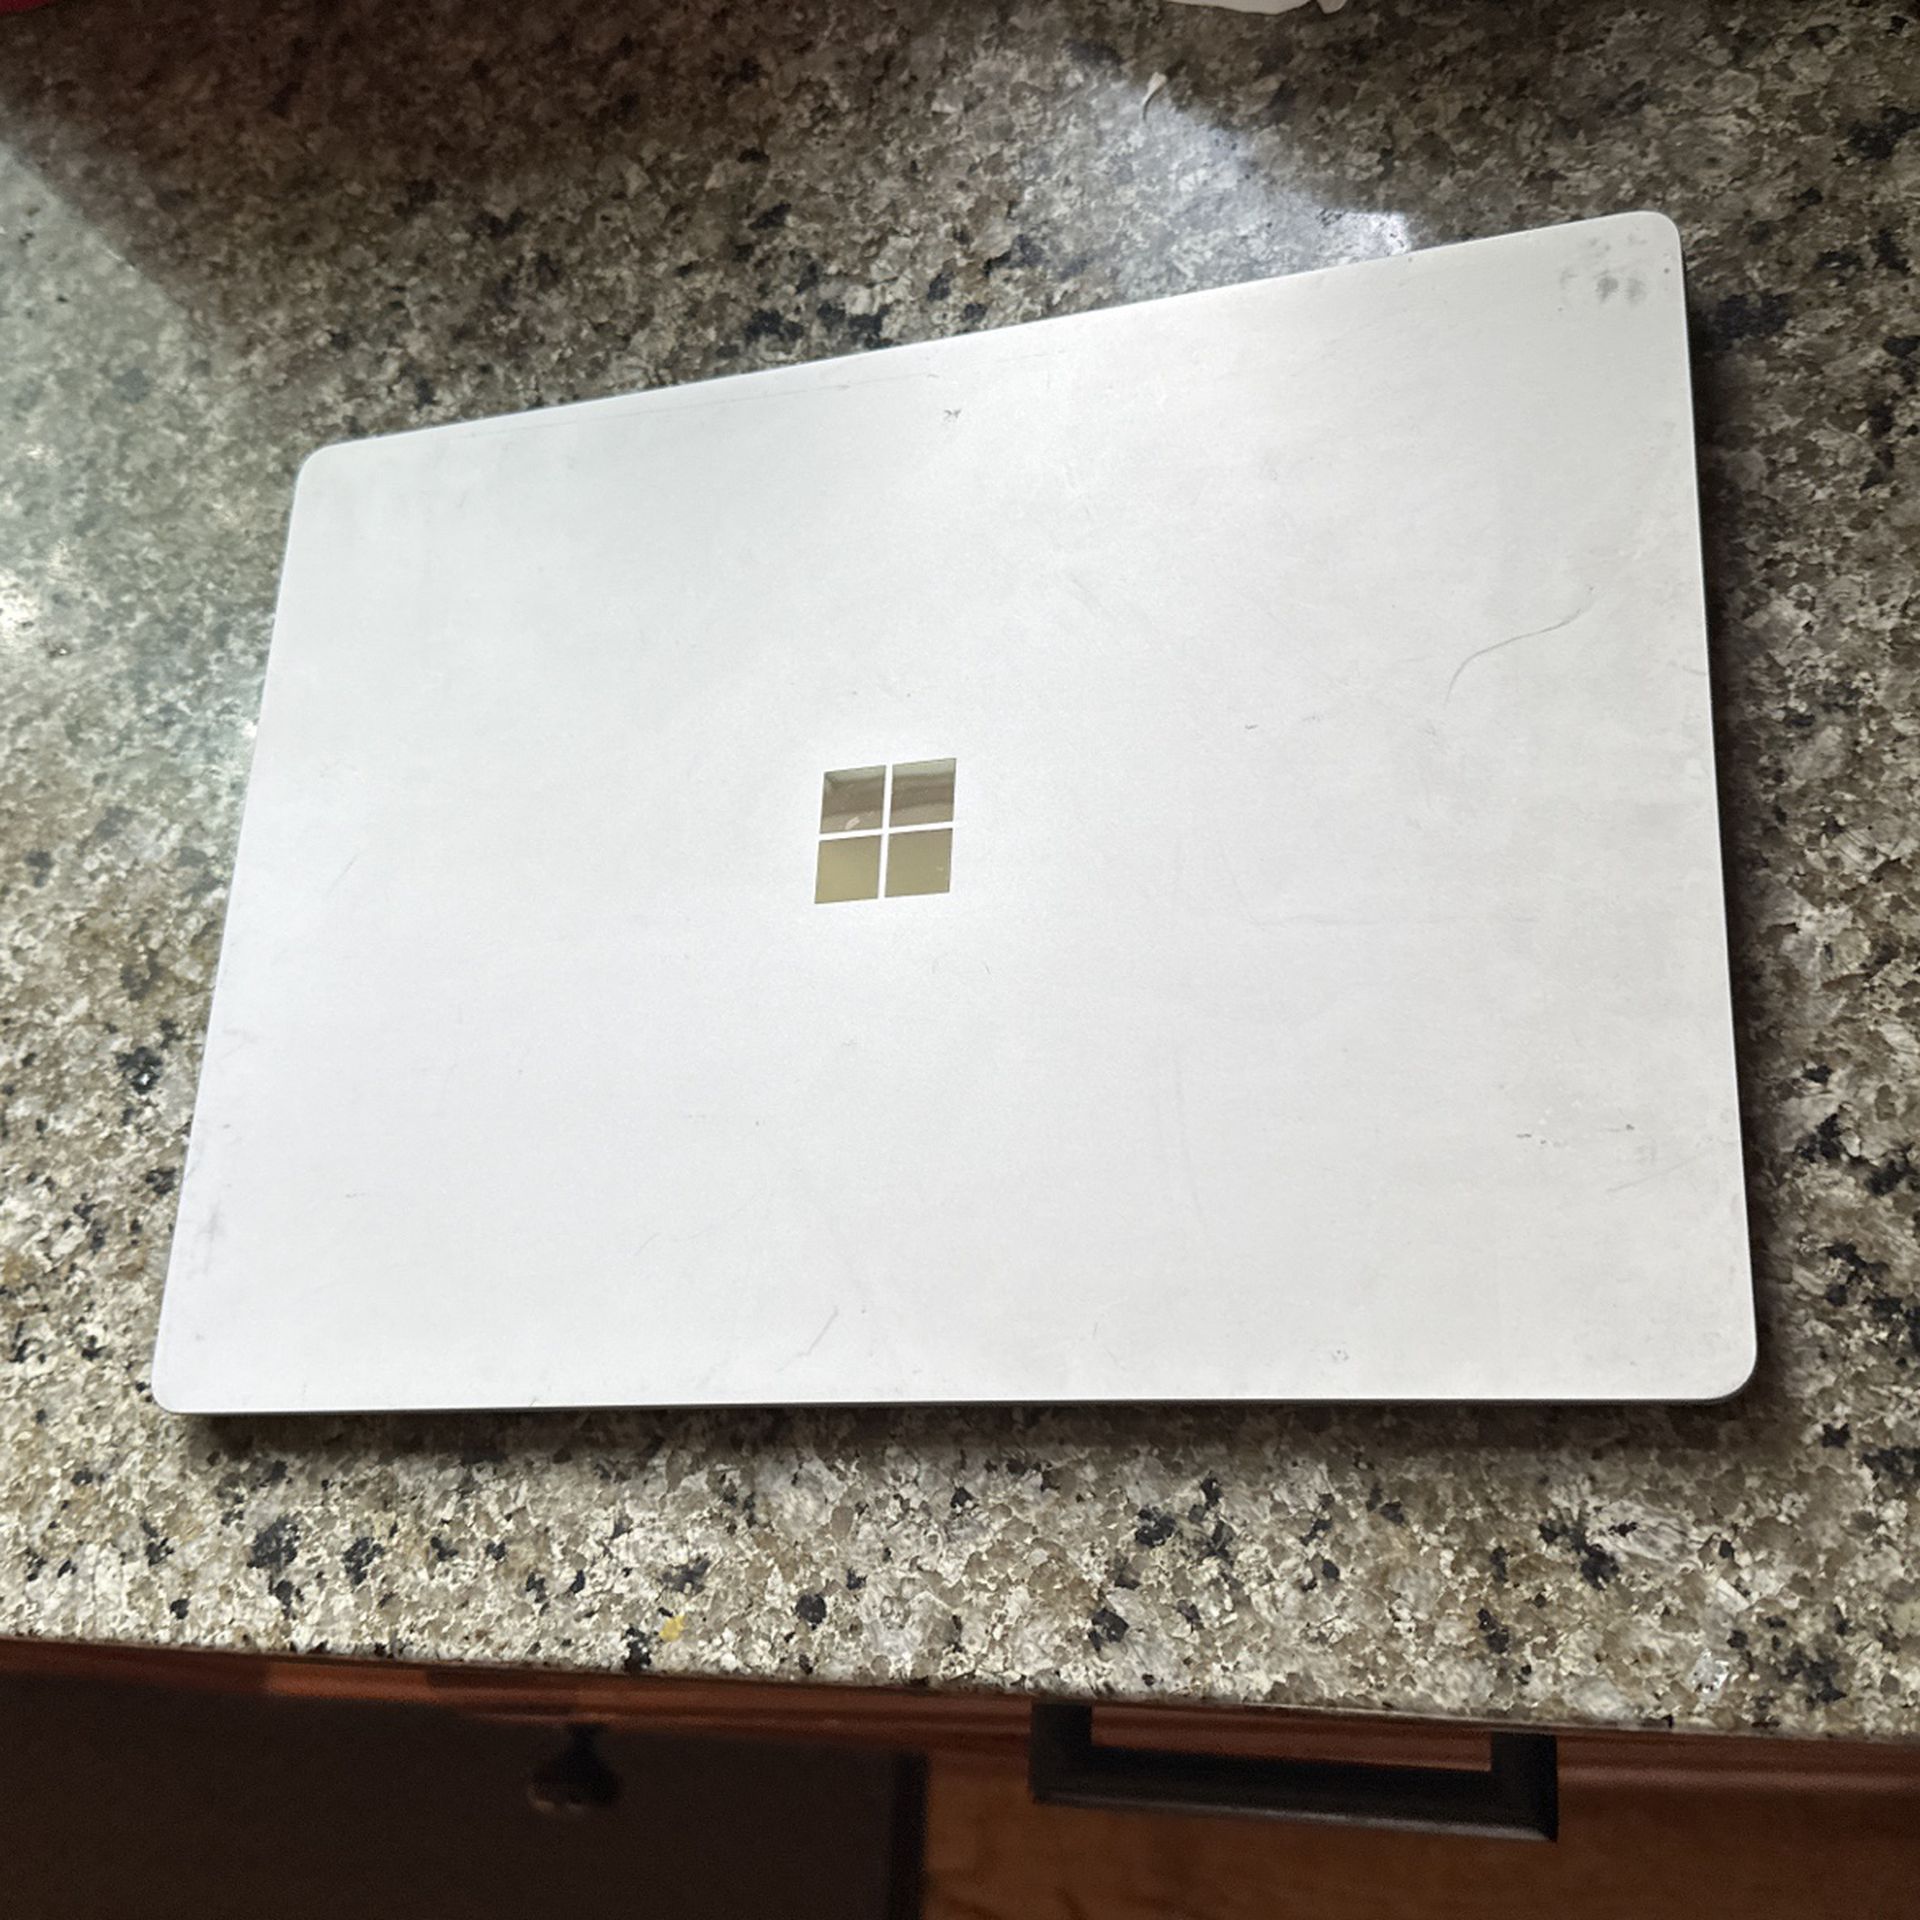 Microsoft Surface Laptop 2 With Charger 